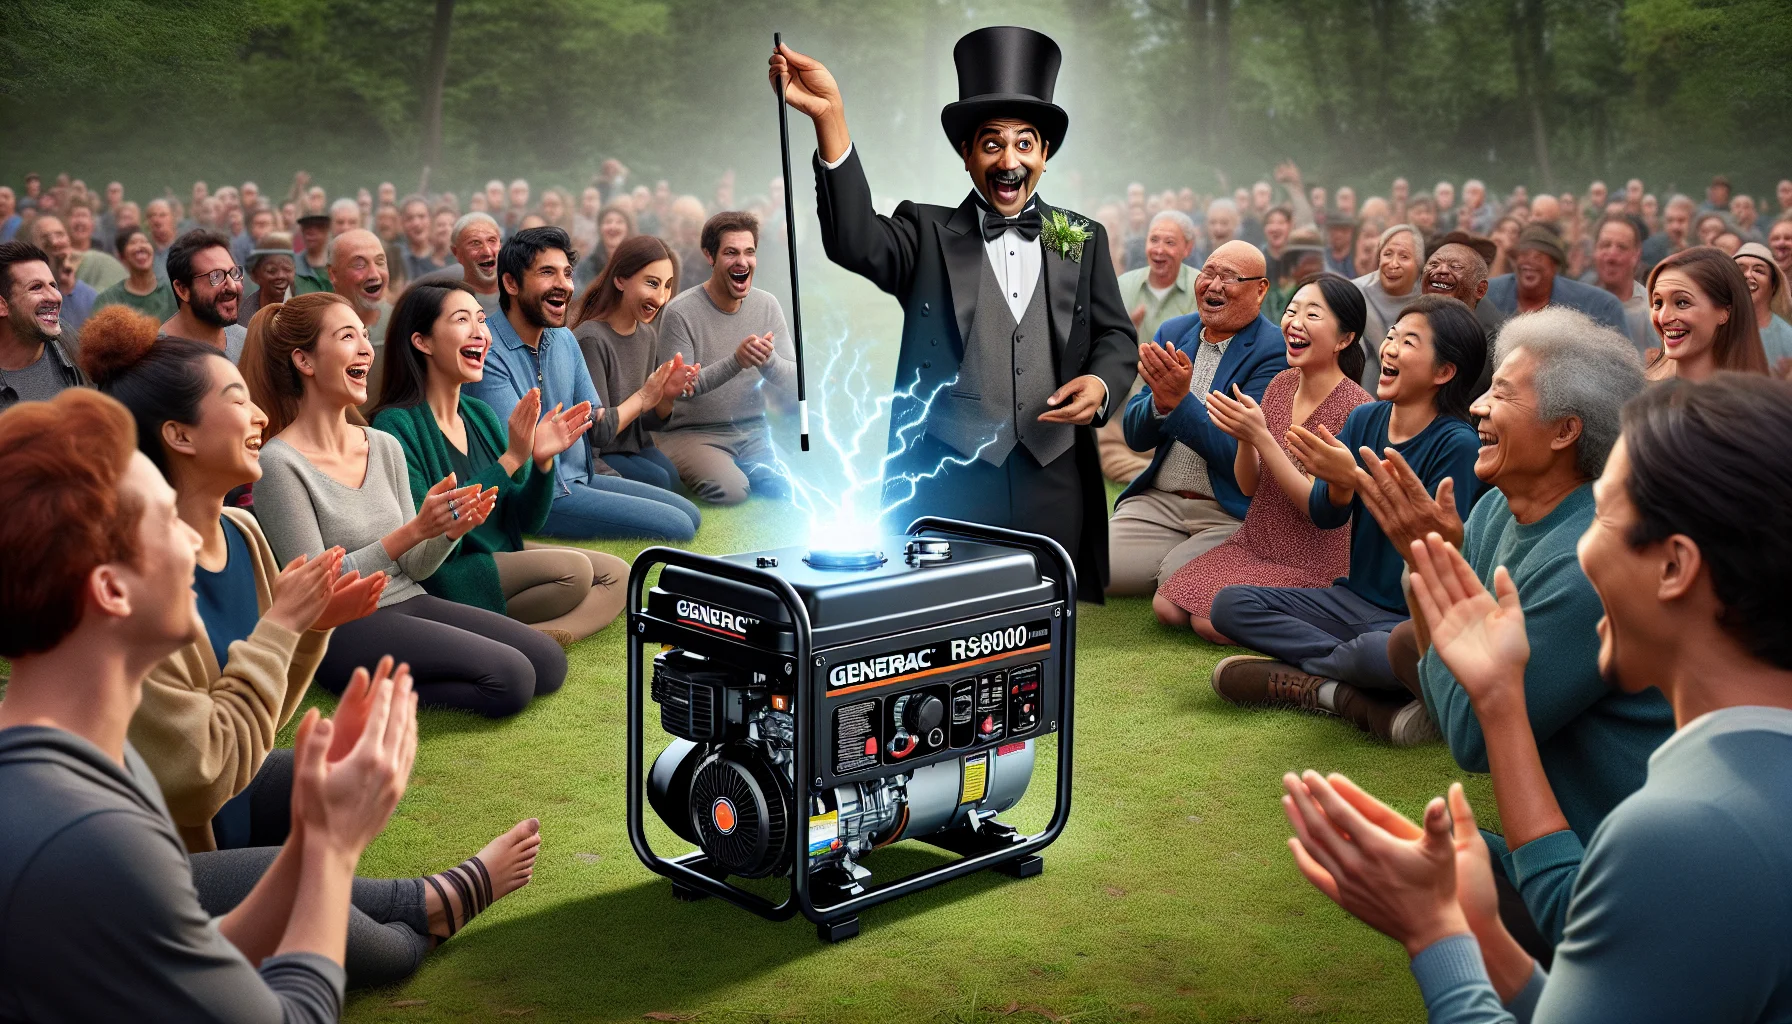 Generate a detailed, realistic image of a Generac RS8000E Generator in a humorous situation. The generator is in the middle of a grassy park dressed up like a magician with a top hat and a wand, pretending to cast a spell. It's surrounded by a mixed audience: a South Asian woman, a Caucasian man, a Black boy, and a Hispanic elderly man, all laughing and clapping enthusiastically. Their faces express amazement as they witness the 'magic' trick, which is the generator's ability to produce electricity, symbolized by cartoon-style lightning bolts emanating from it.